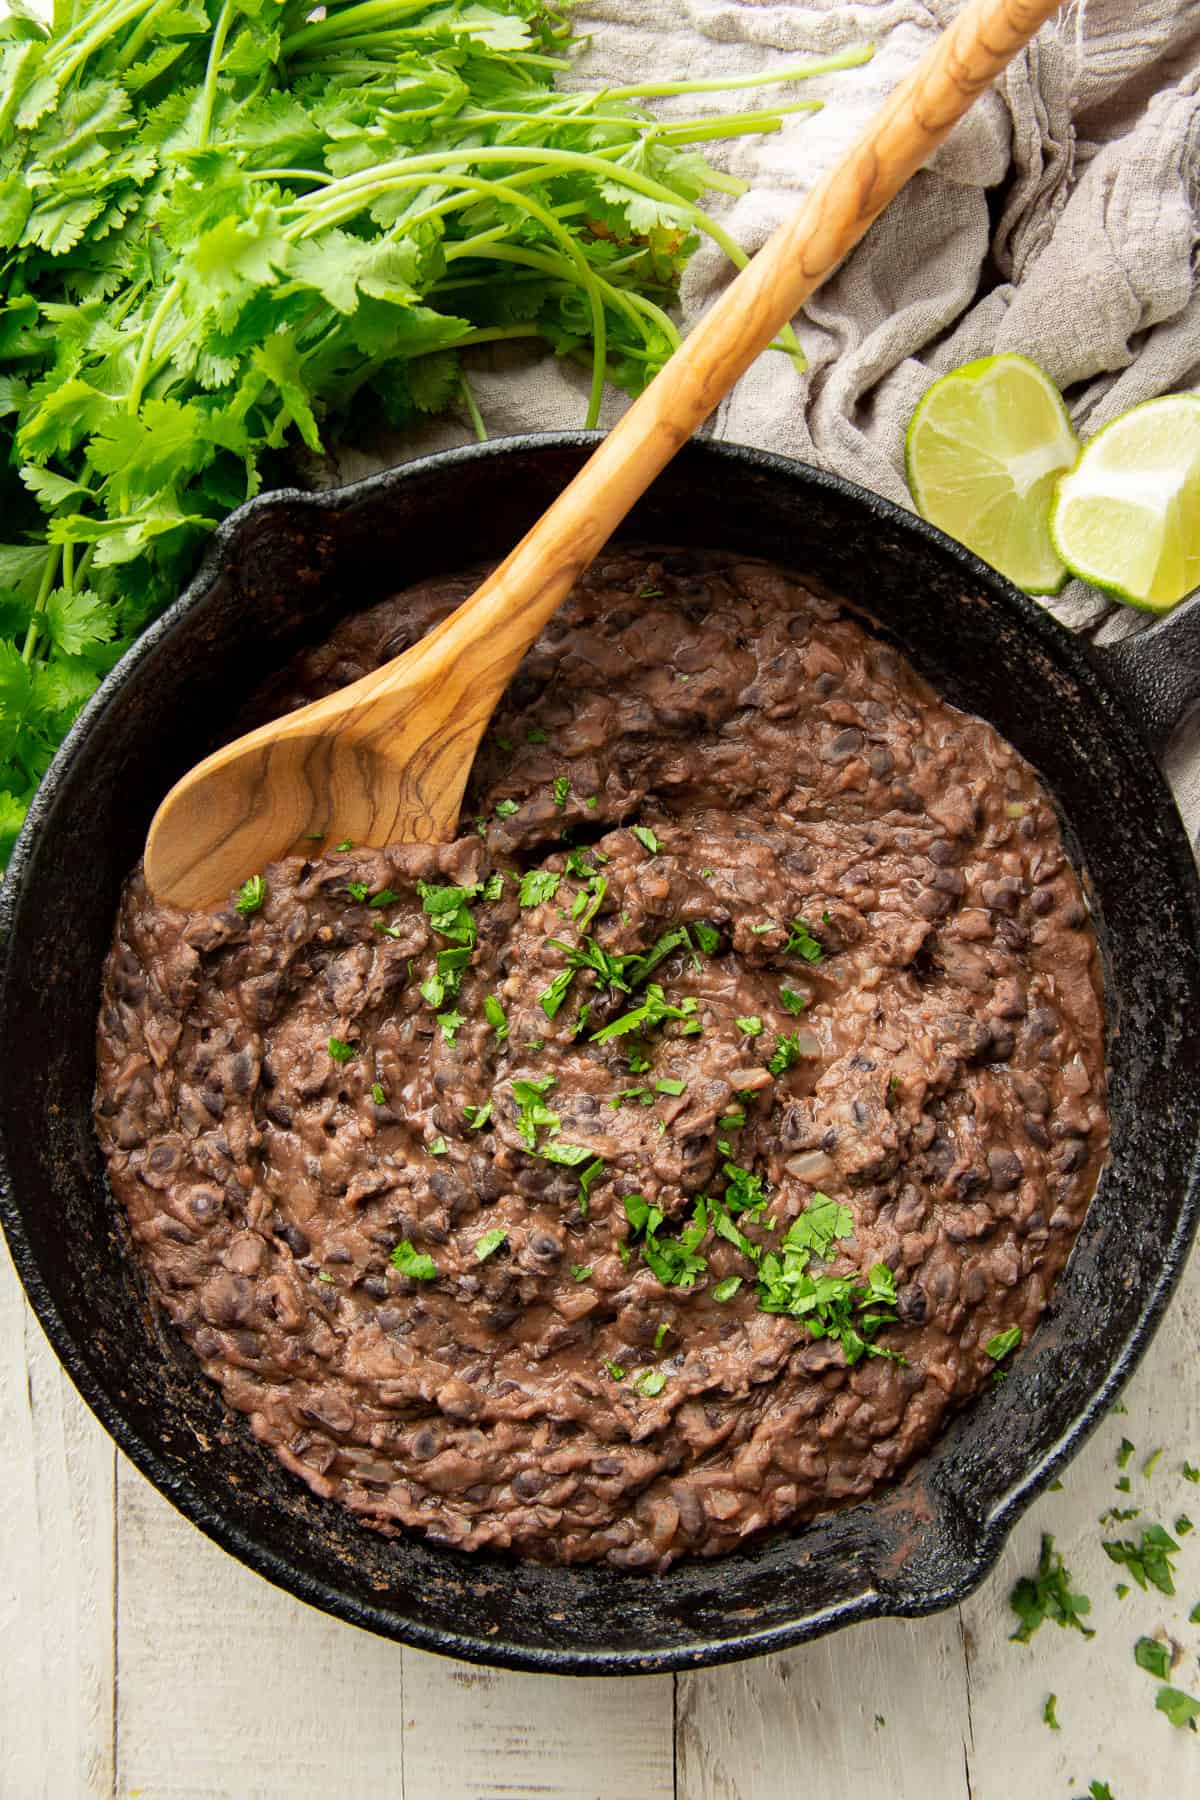 White wooden surface set with skillet of Refried Black Beans, lime slices and bunch of cilantro.